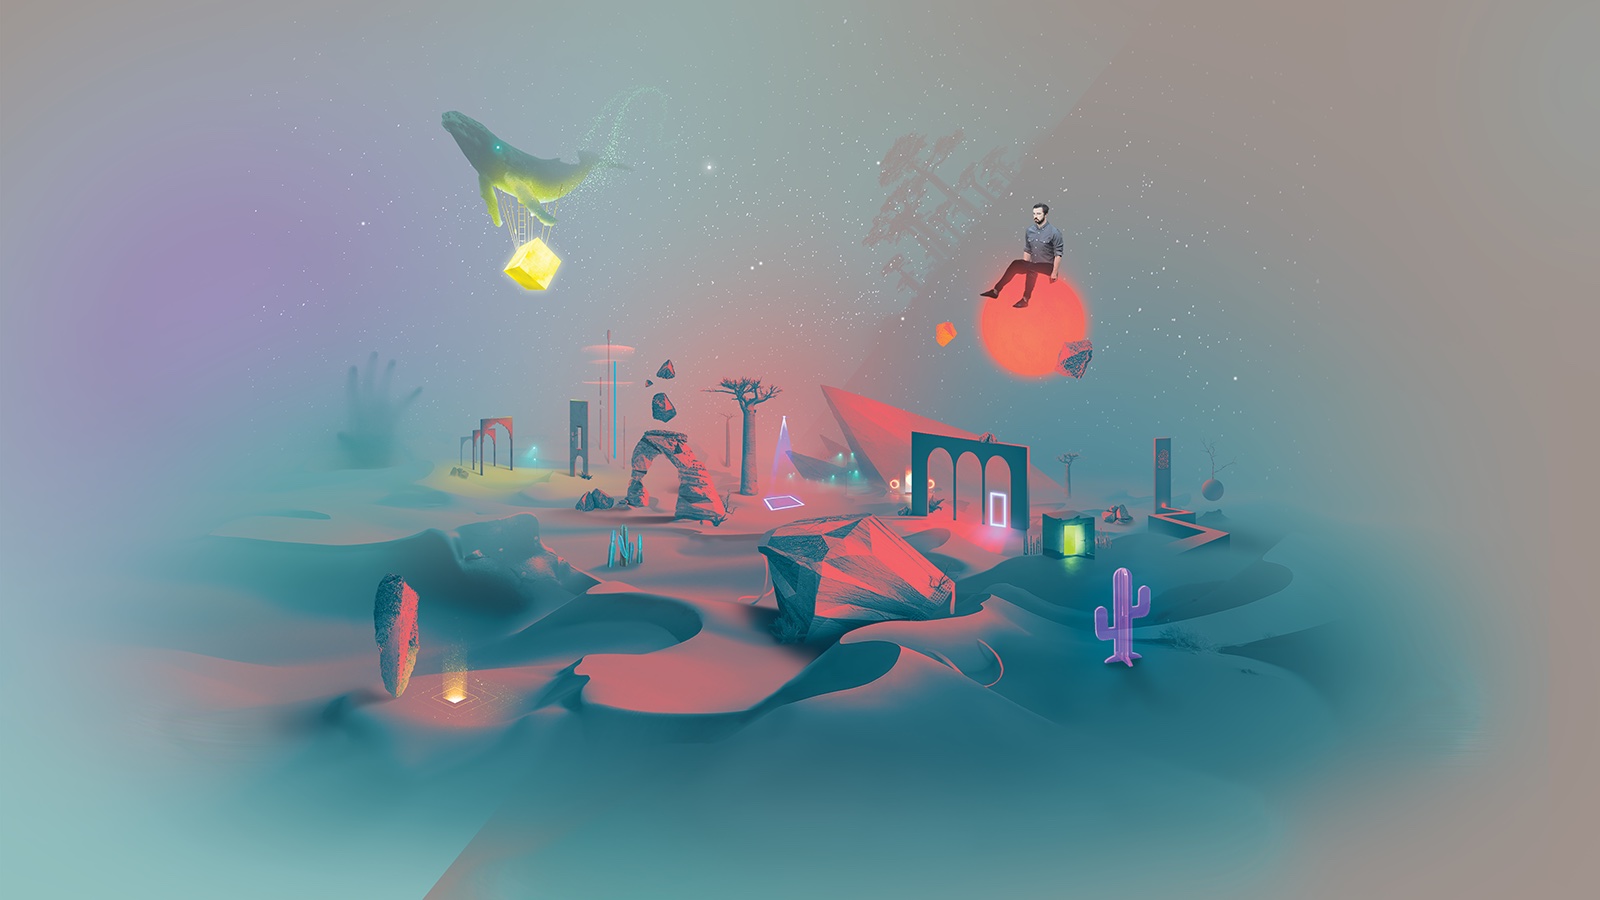 A digital rendering of a holoverse fantasy land glowing red and yellow and featuring a purple cactus, a floating green whale, and a man sitting on a glowing sphere, all over sand dunes